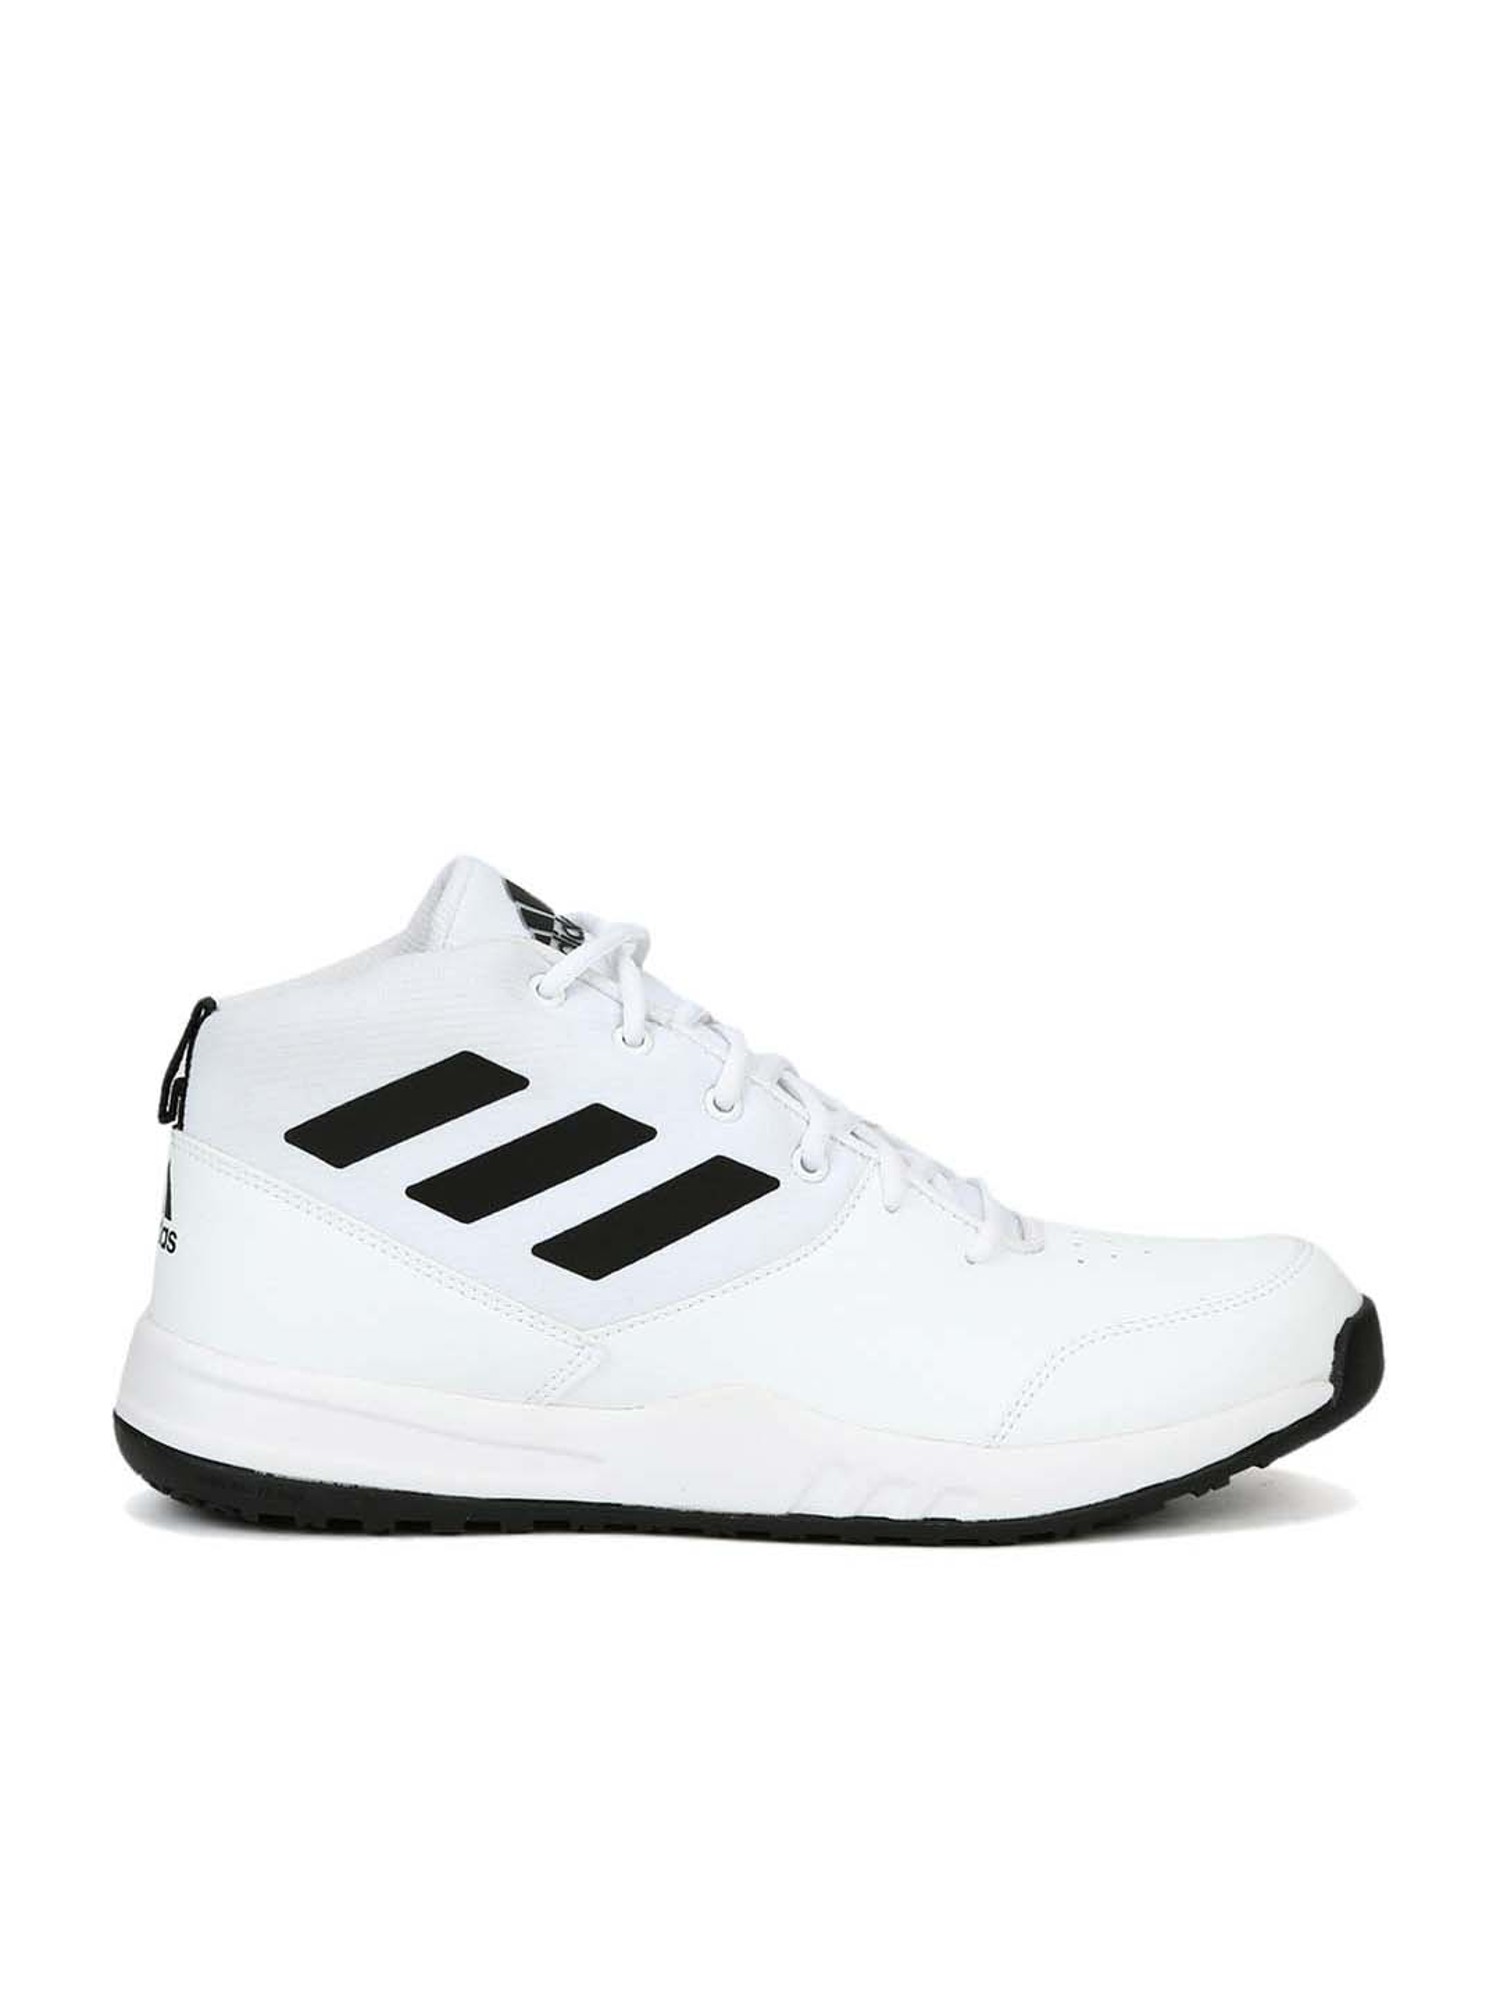 Buy Adidas Men's Court Rage M White Running Shoes for at Best Price @ Tata